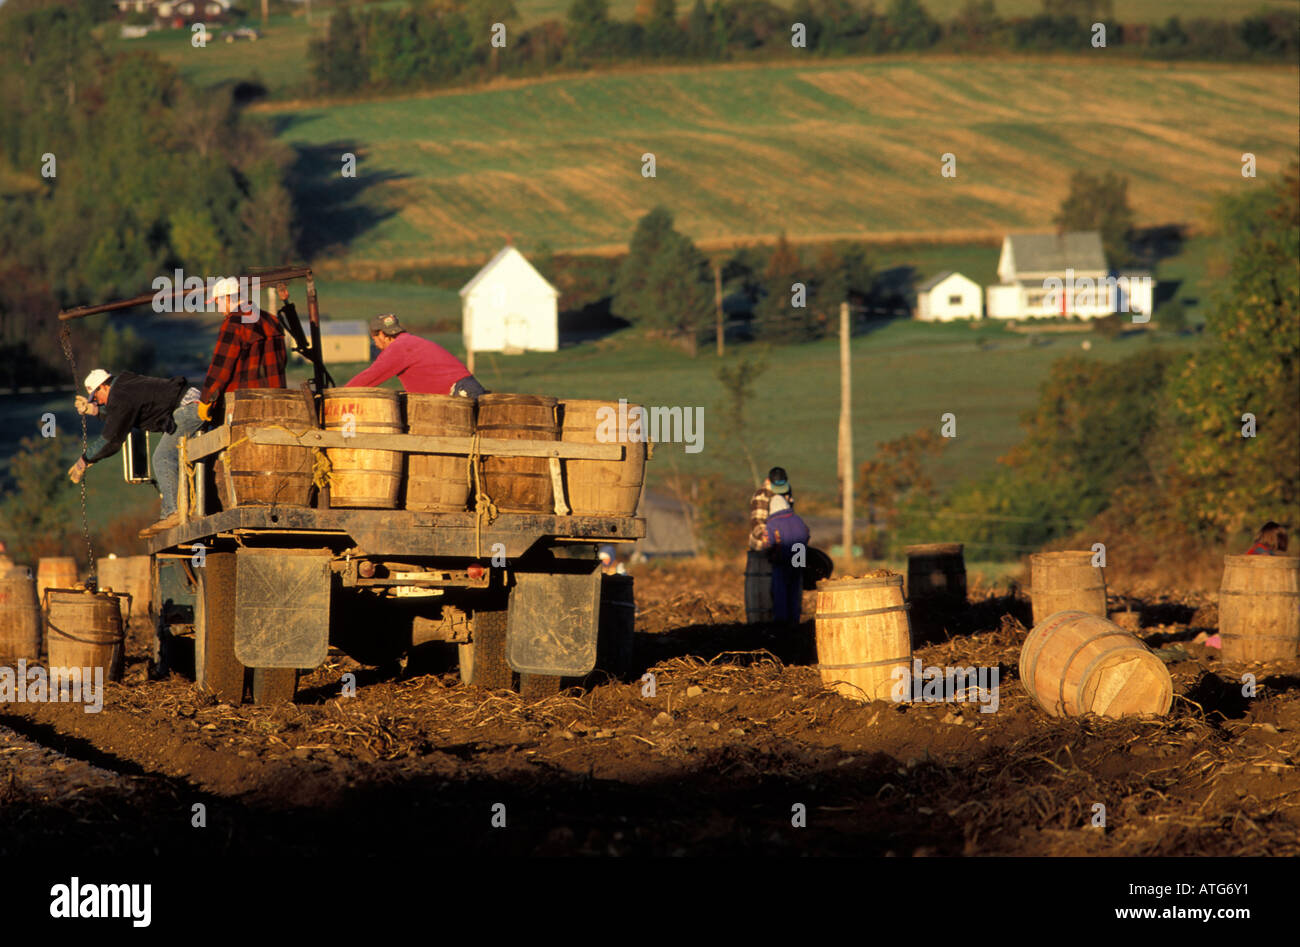 Stock image of boys and girls helping out during the fall potato harest using barrels for hand picking Stock Photo